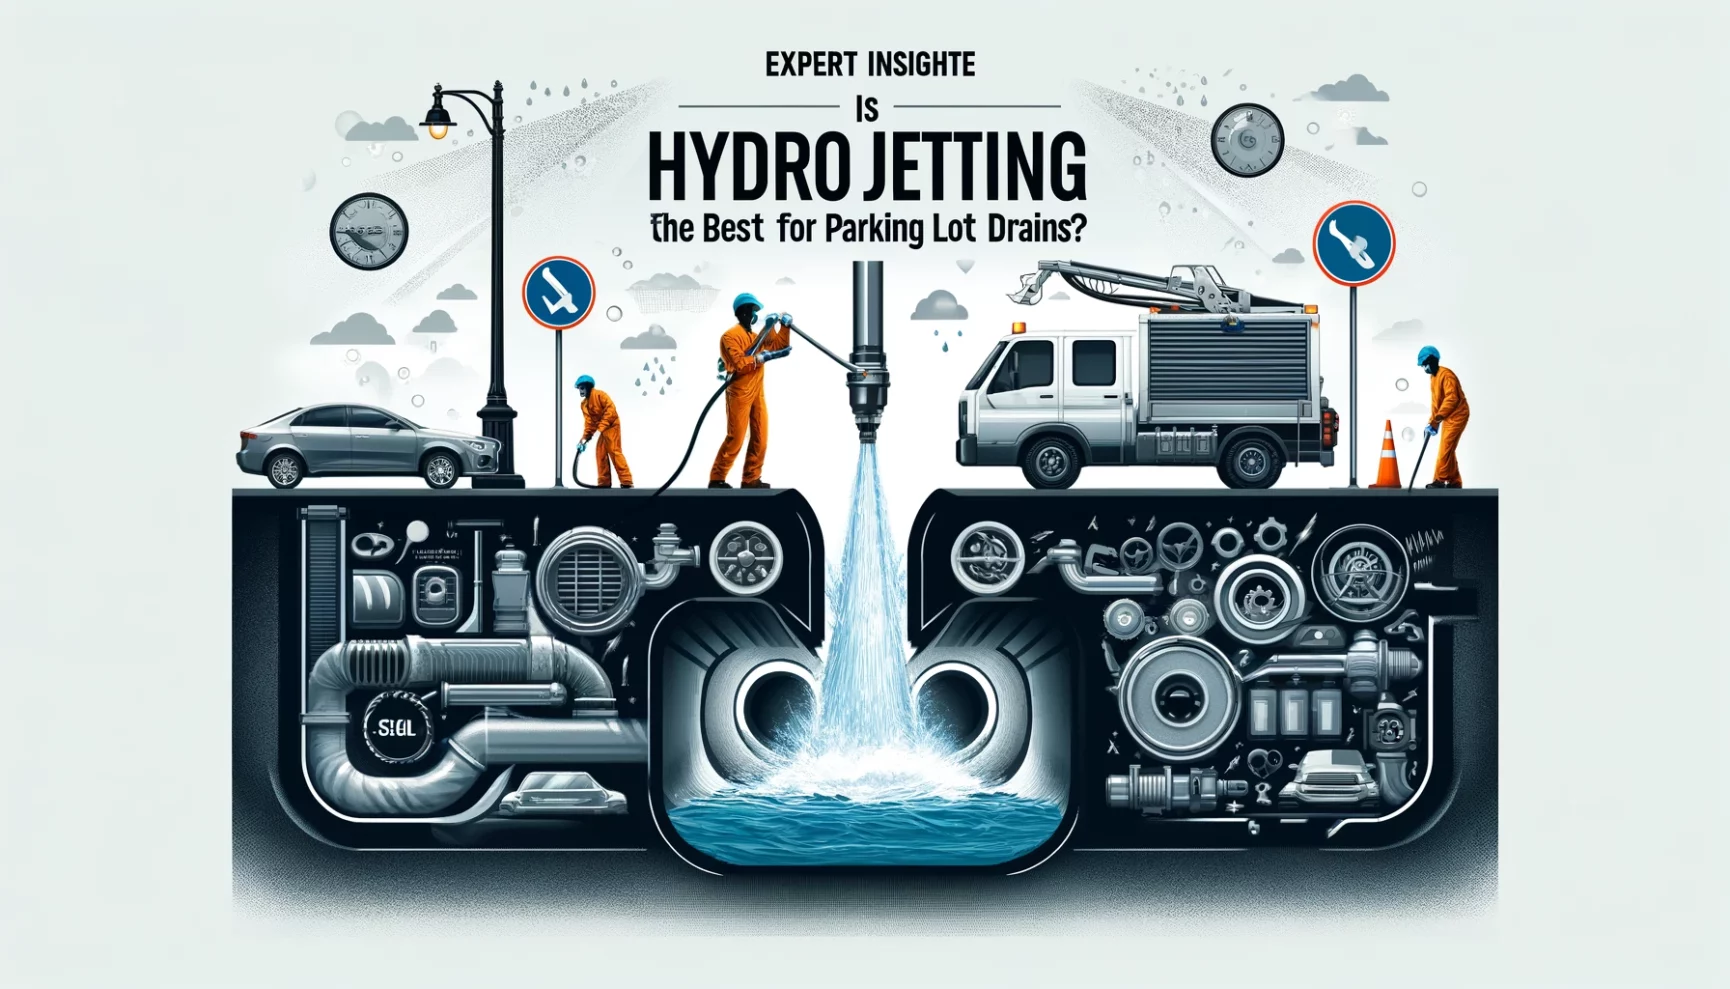 An illustrative comparison of hydro jetting effectiveness in clearing parking lot drains, featuring surface and subsurface visuals.